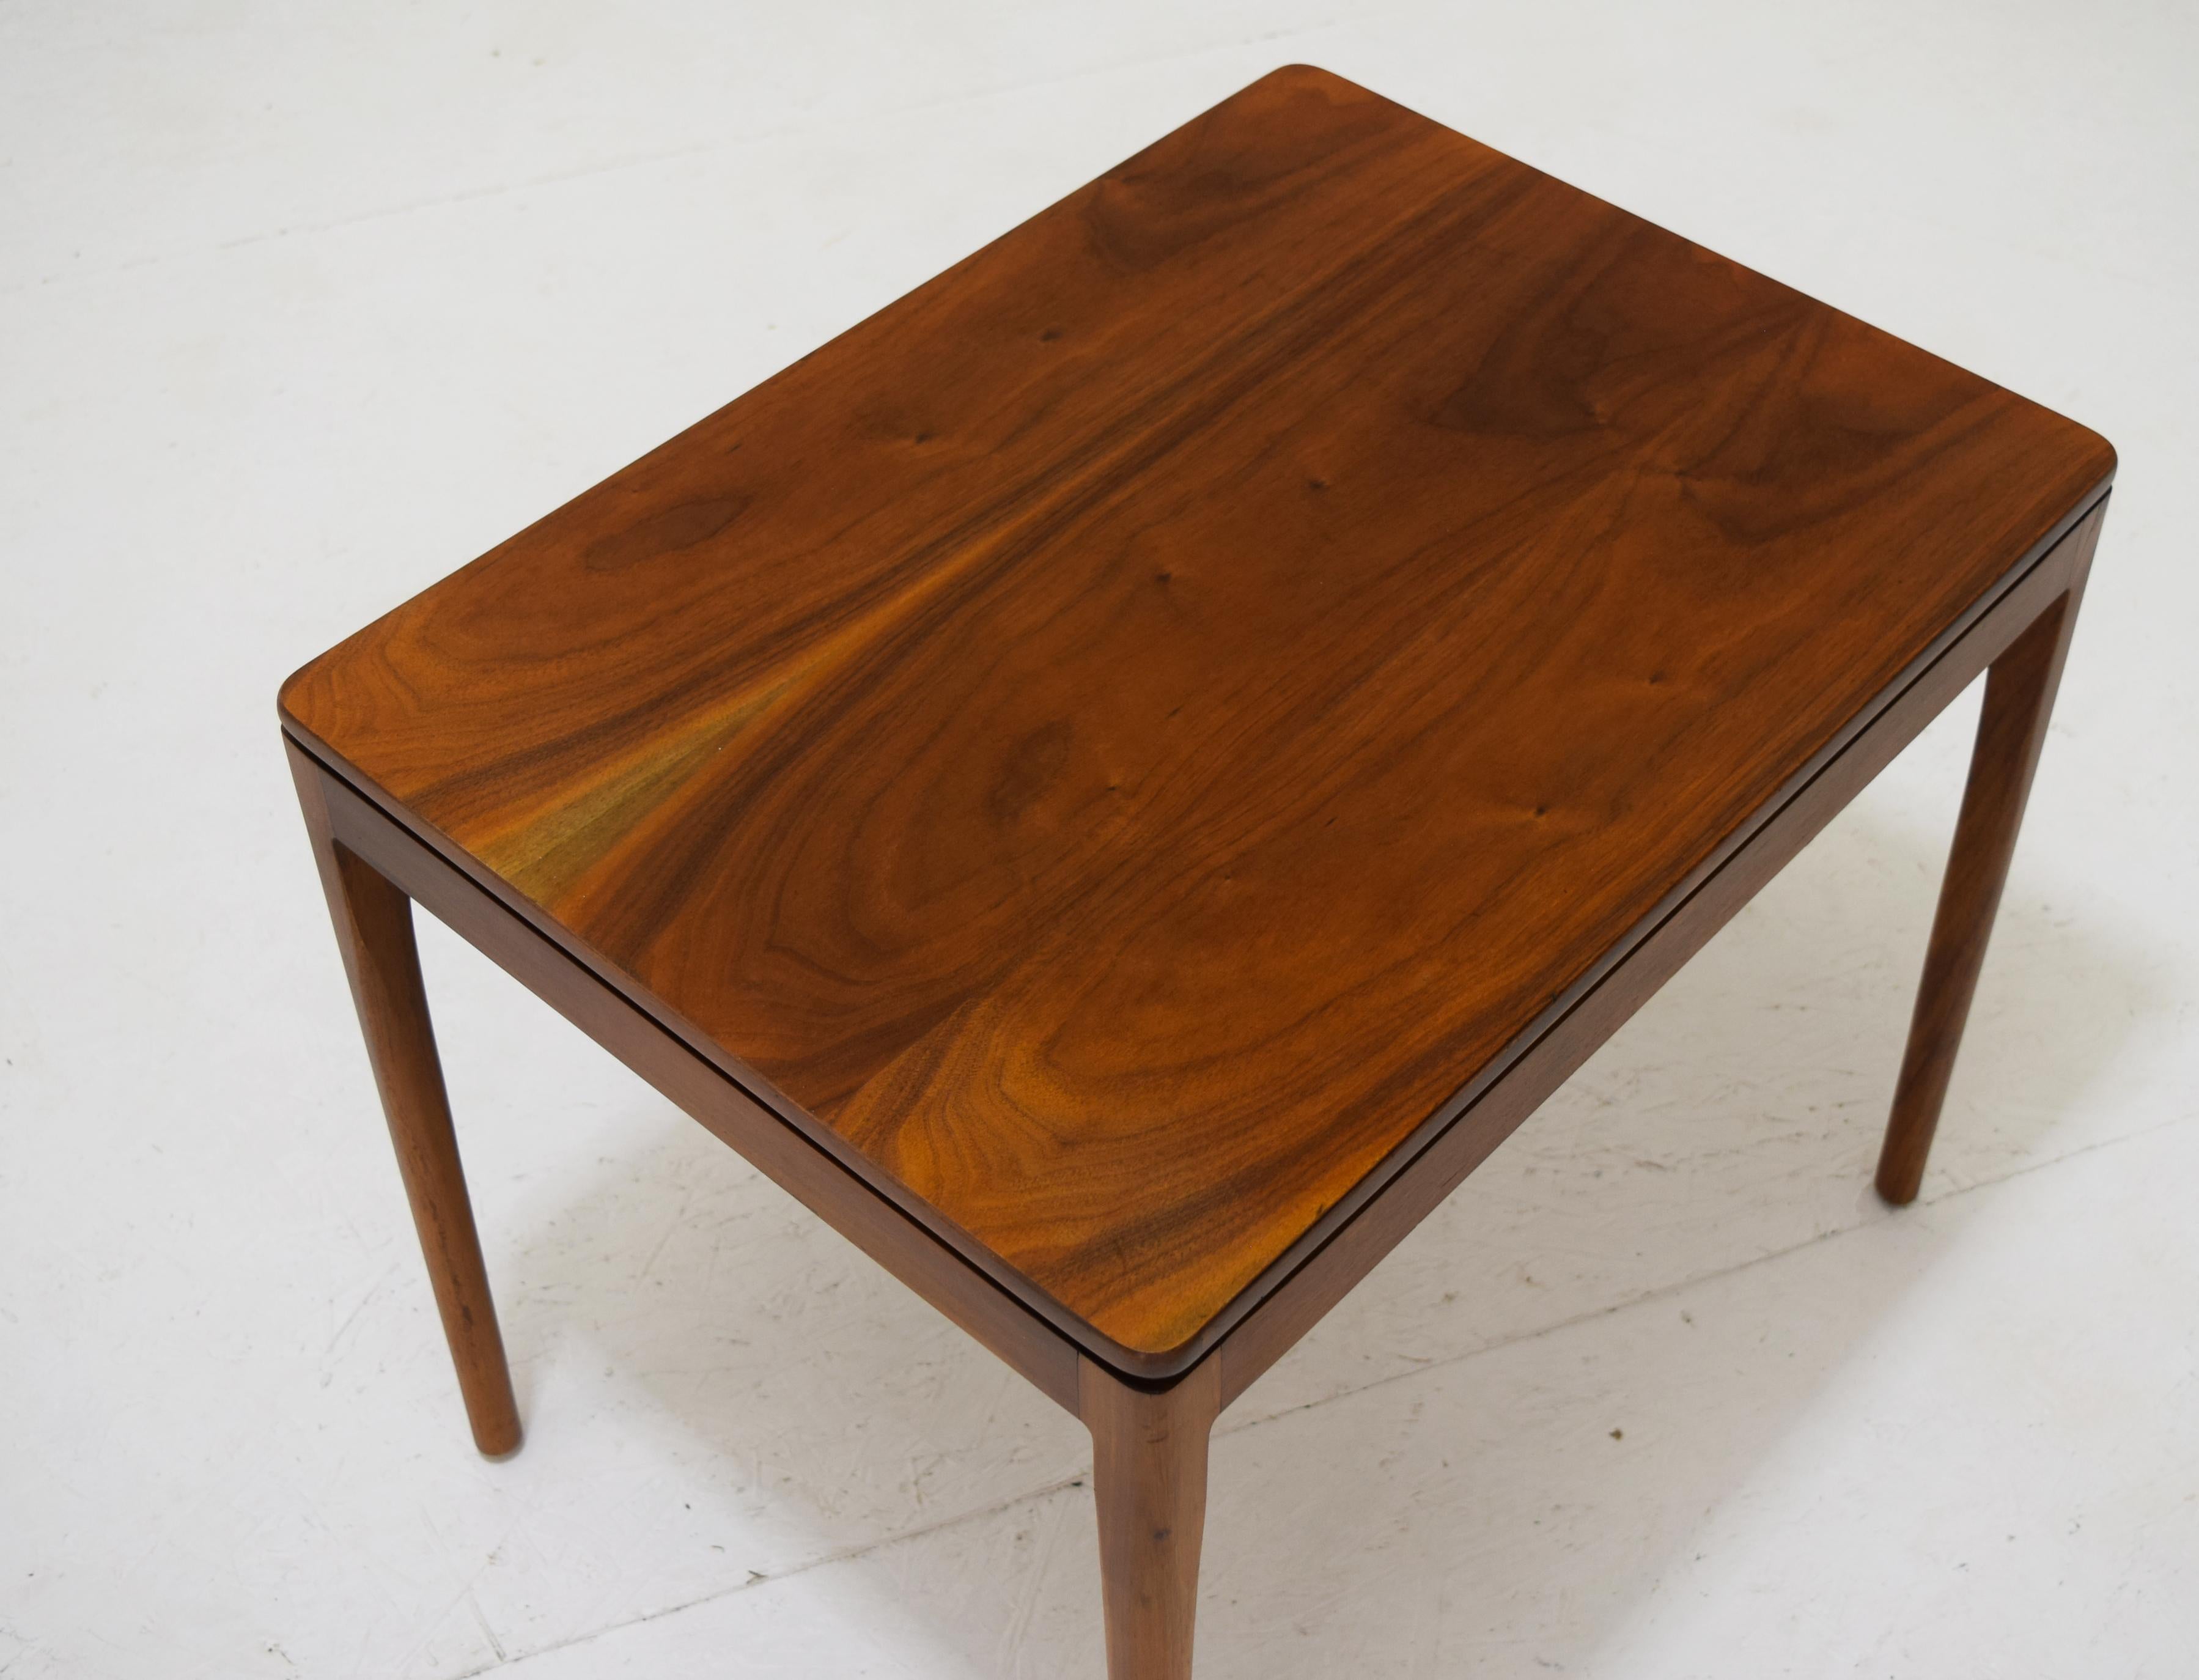 American Refinished Set of 3 Nesting Tables in Walnut by Drexel